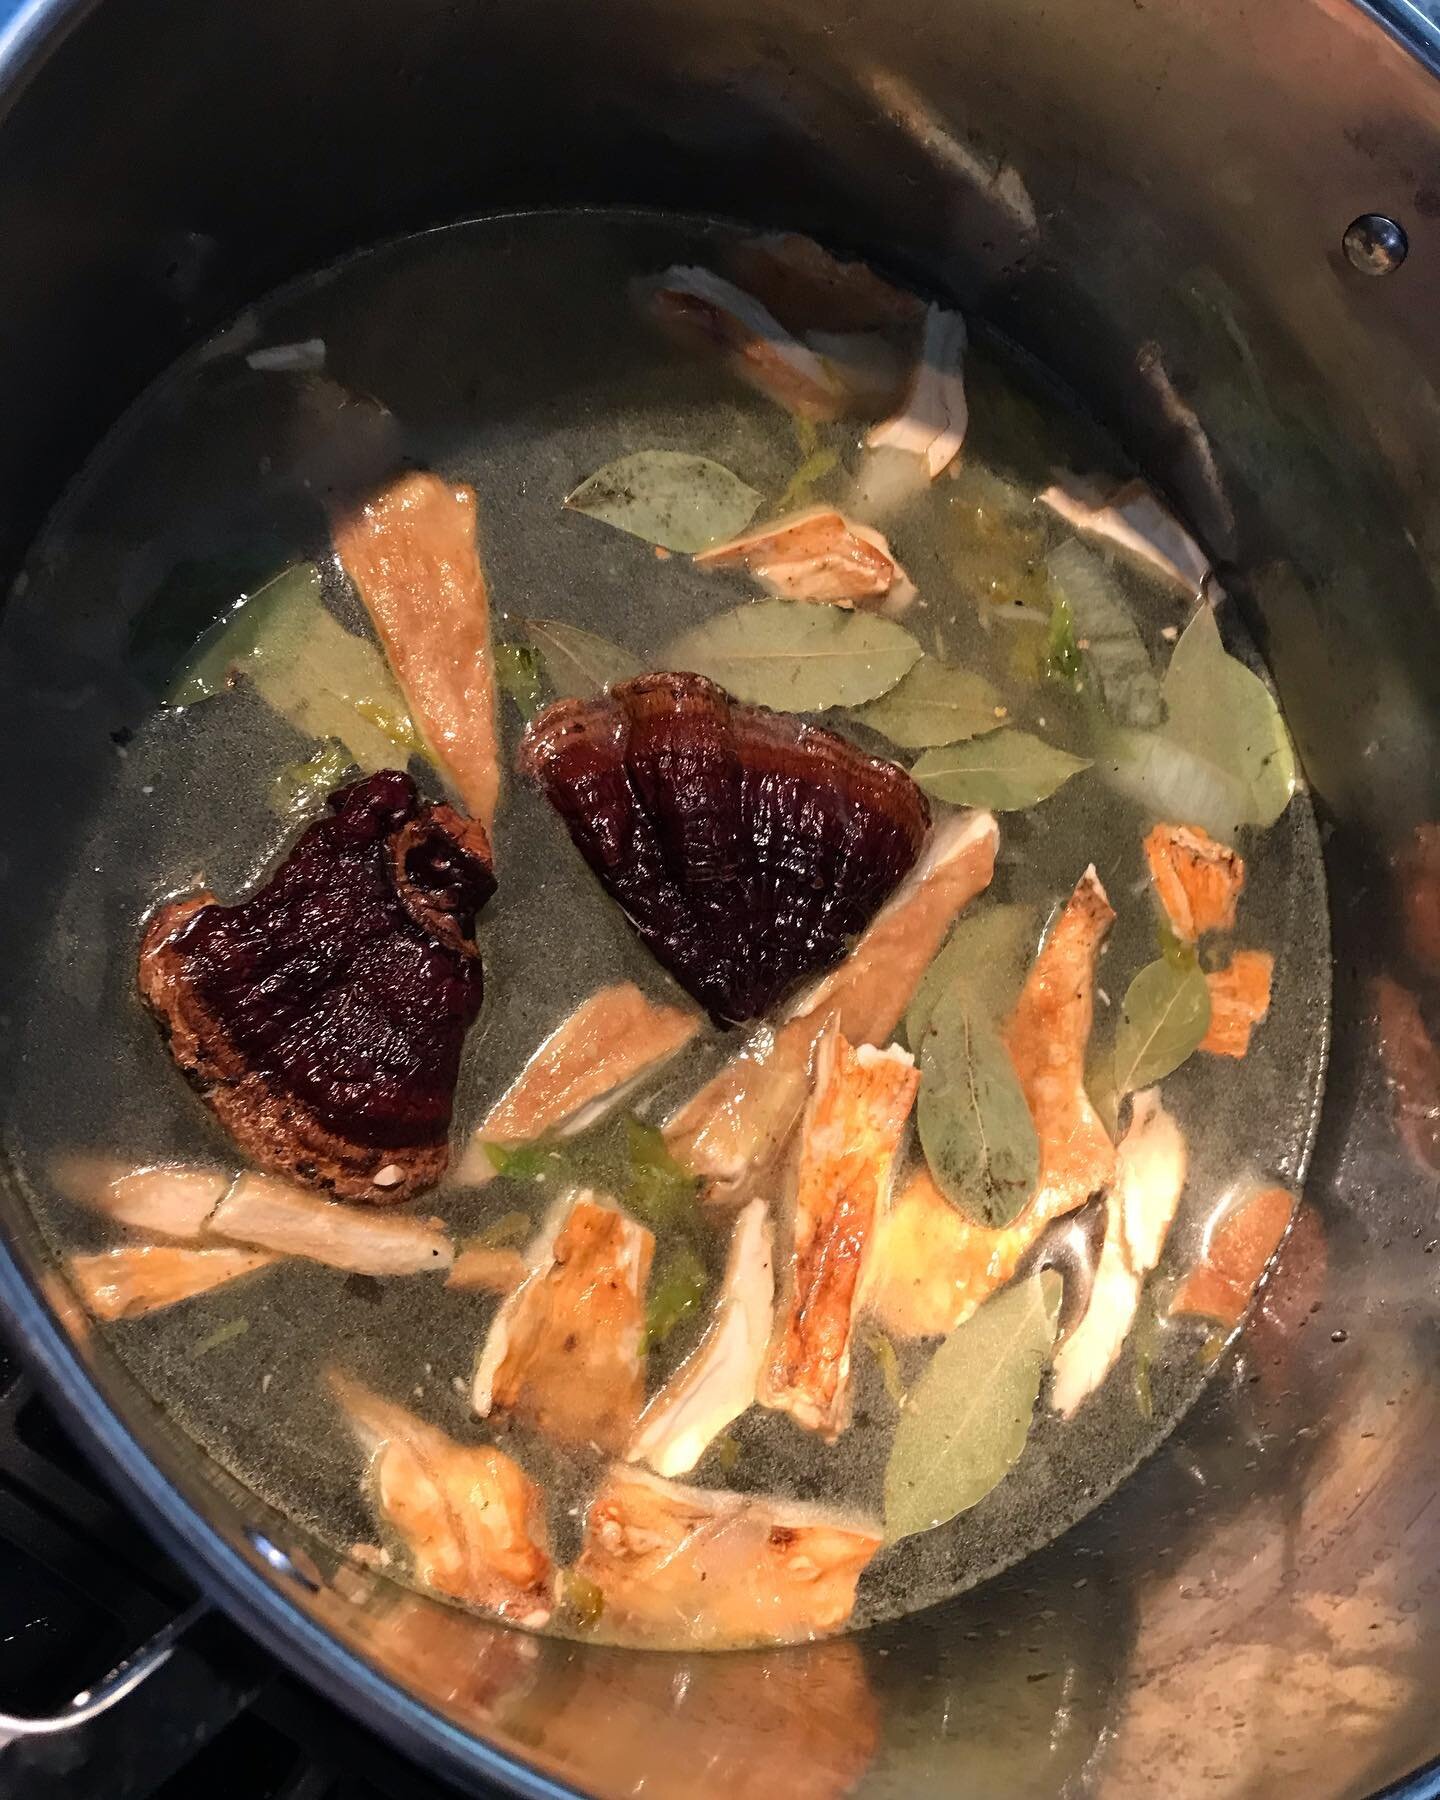 ✨ making medicine today ✨

adding reishi that I foraged off a neighbors tree right here in my Southfield, MI neighborhood this summer, as well as some locally foraged chicken of the woods and later some dried morel from last season.

taking inspirati